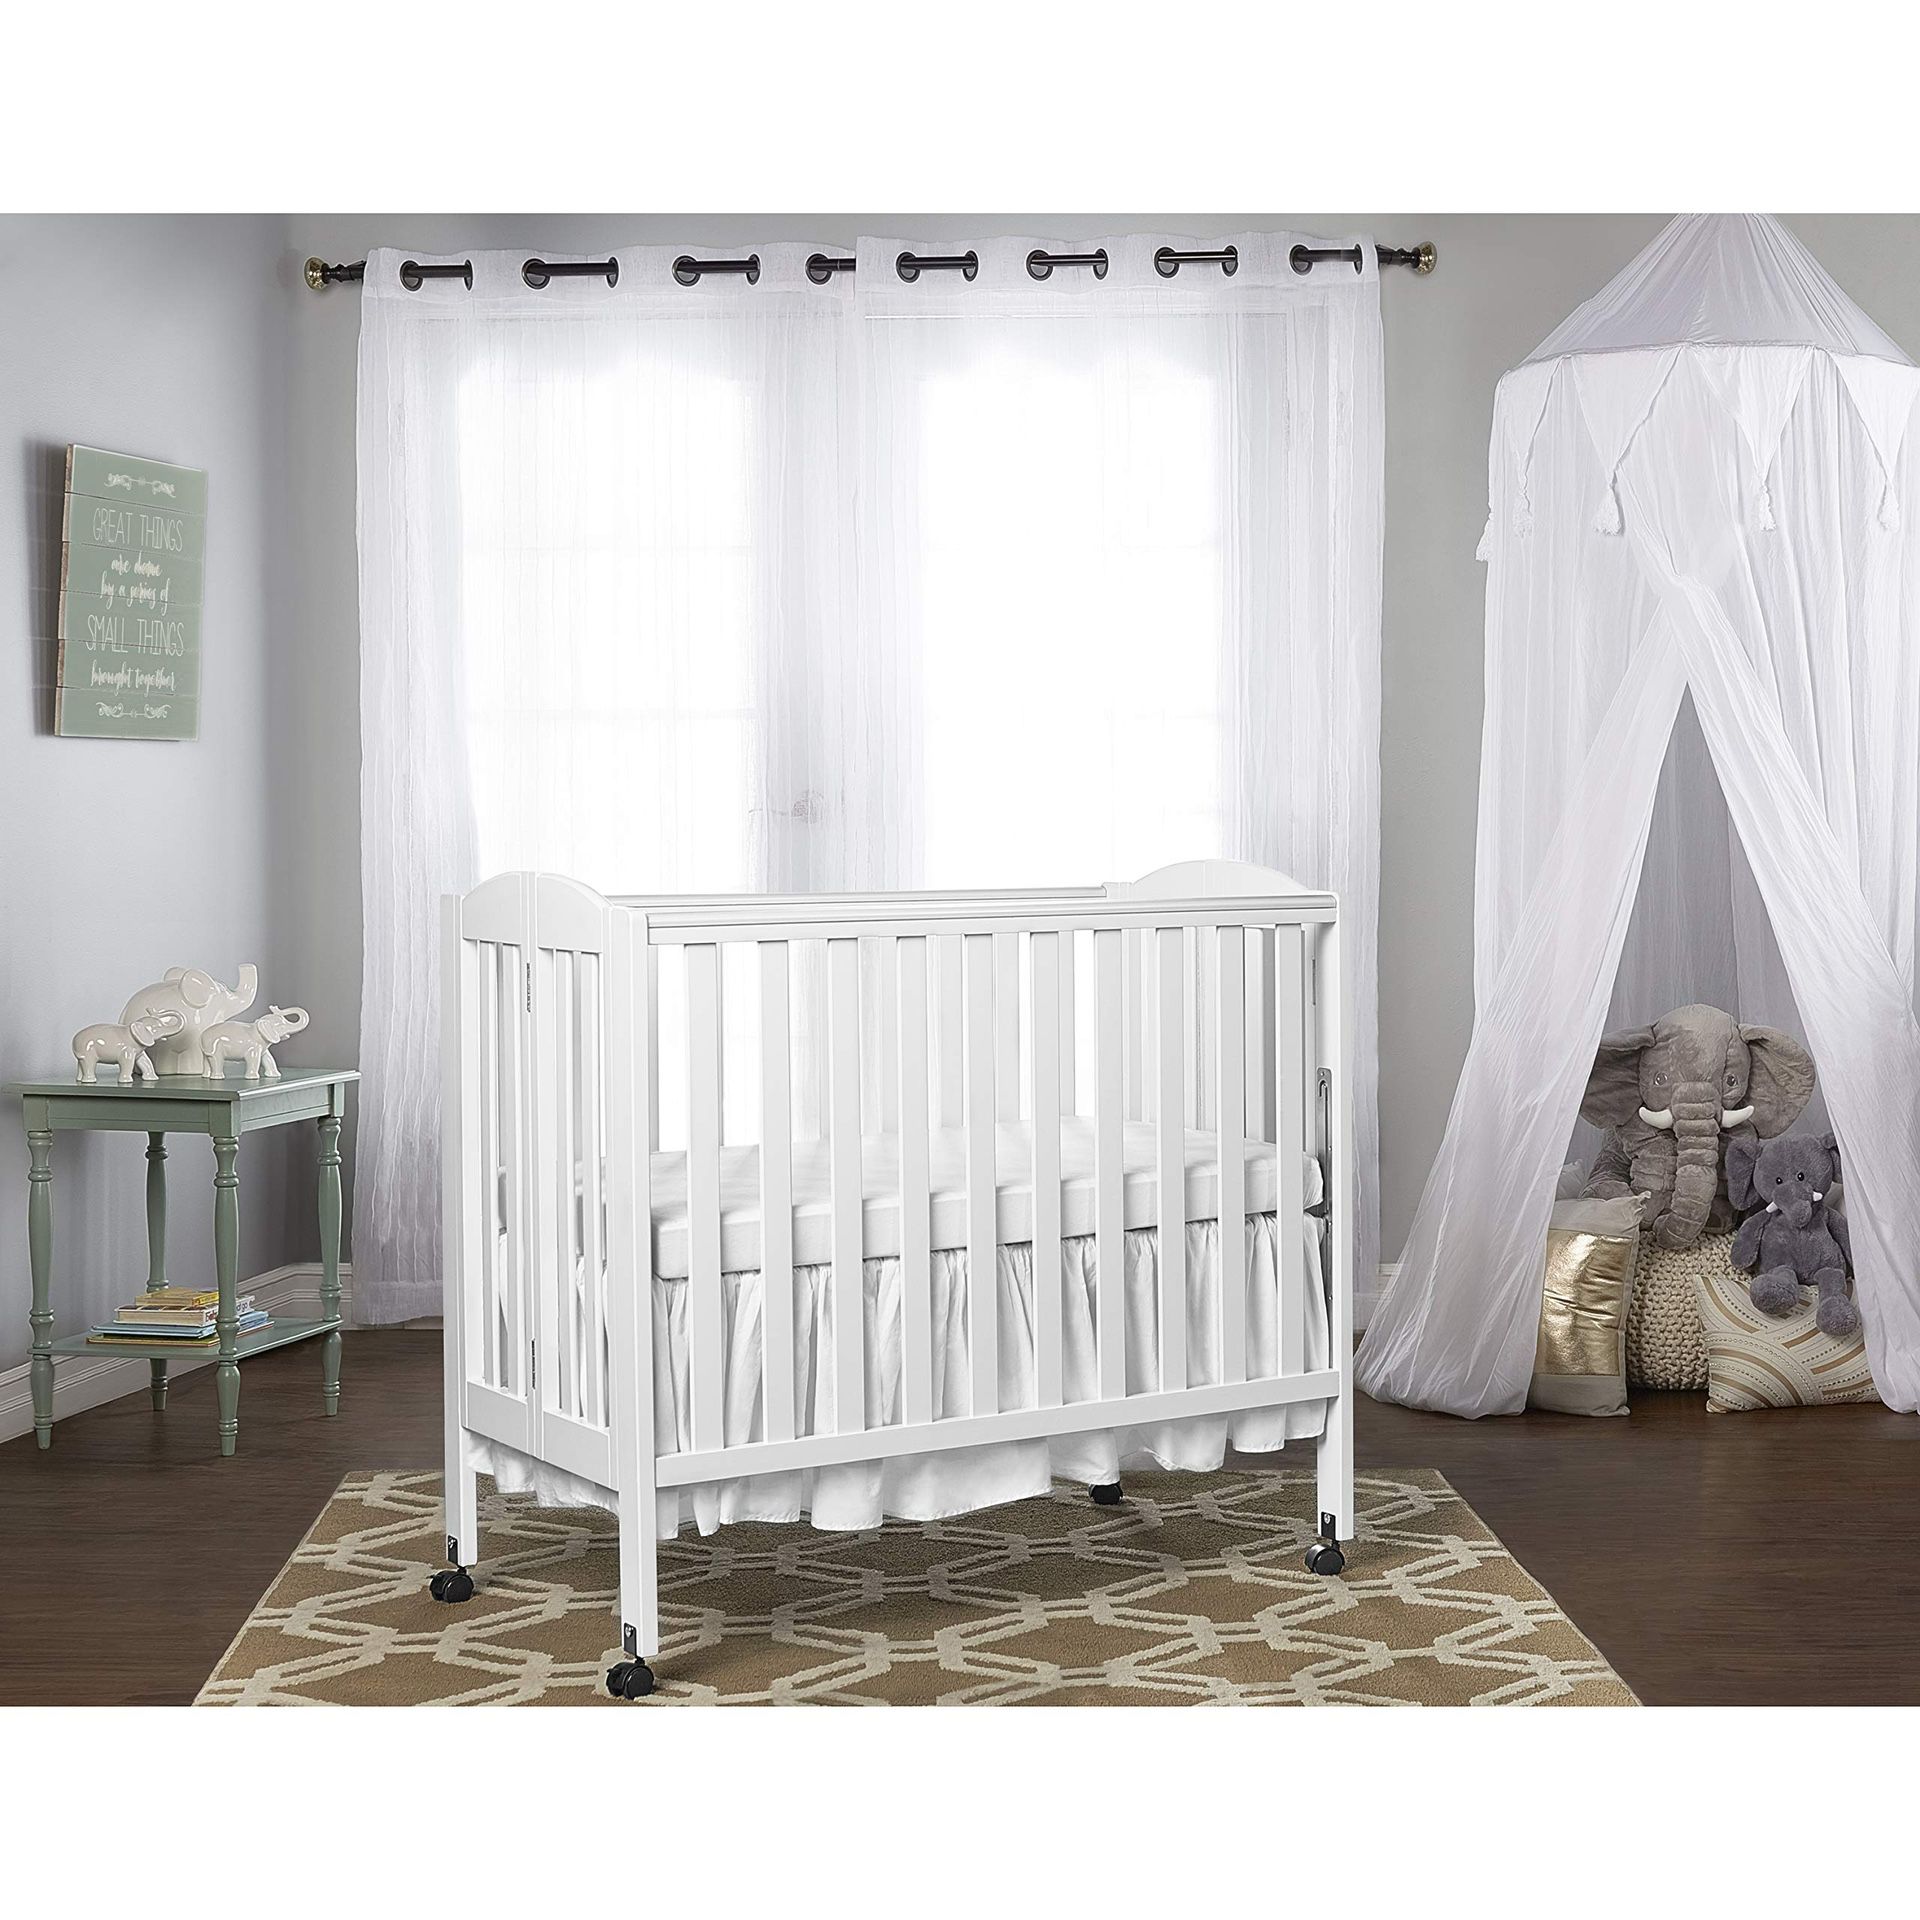 Dream On Me 3 in 1 Portable Folding Stationary Side Crib, White 